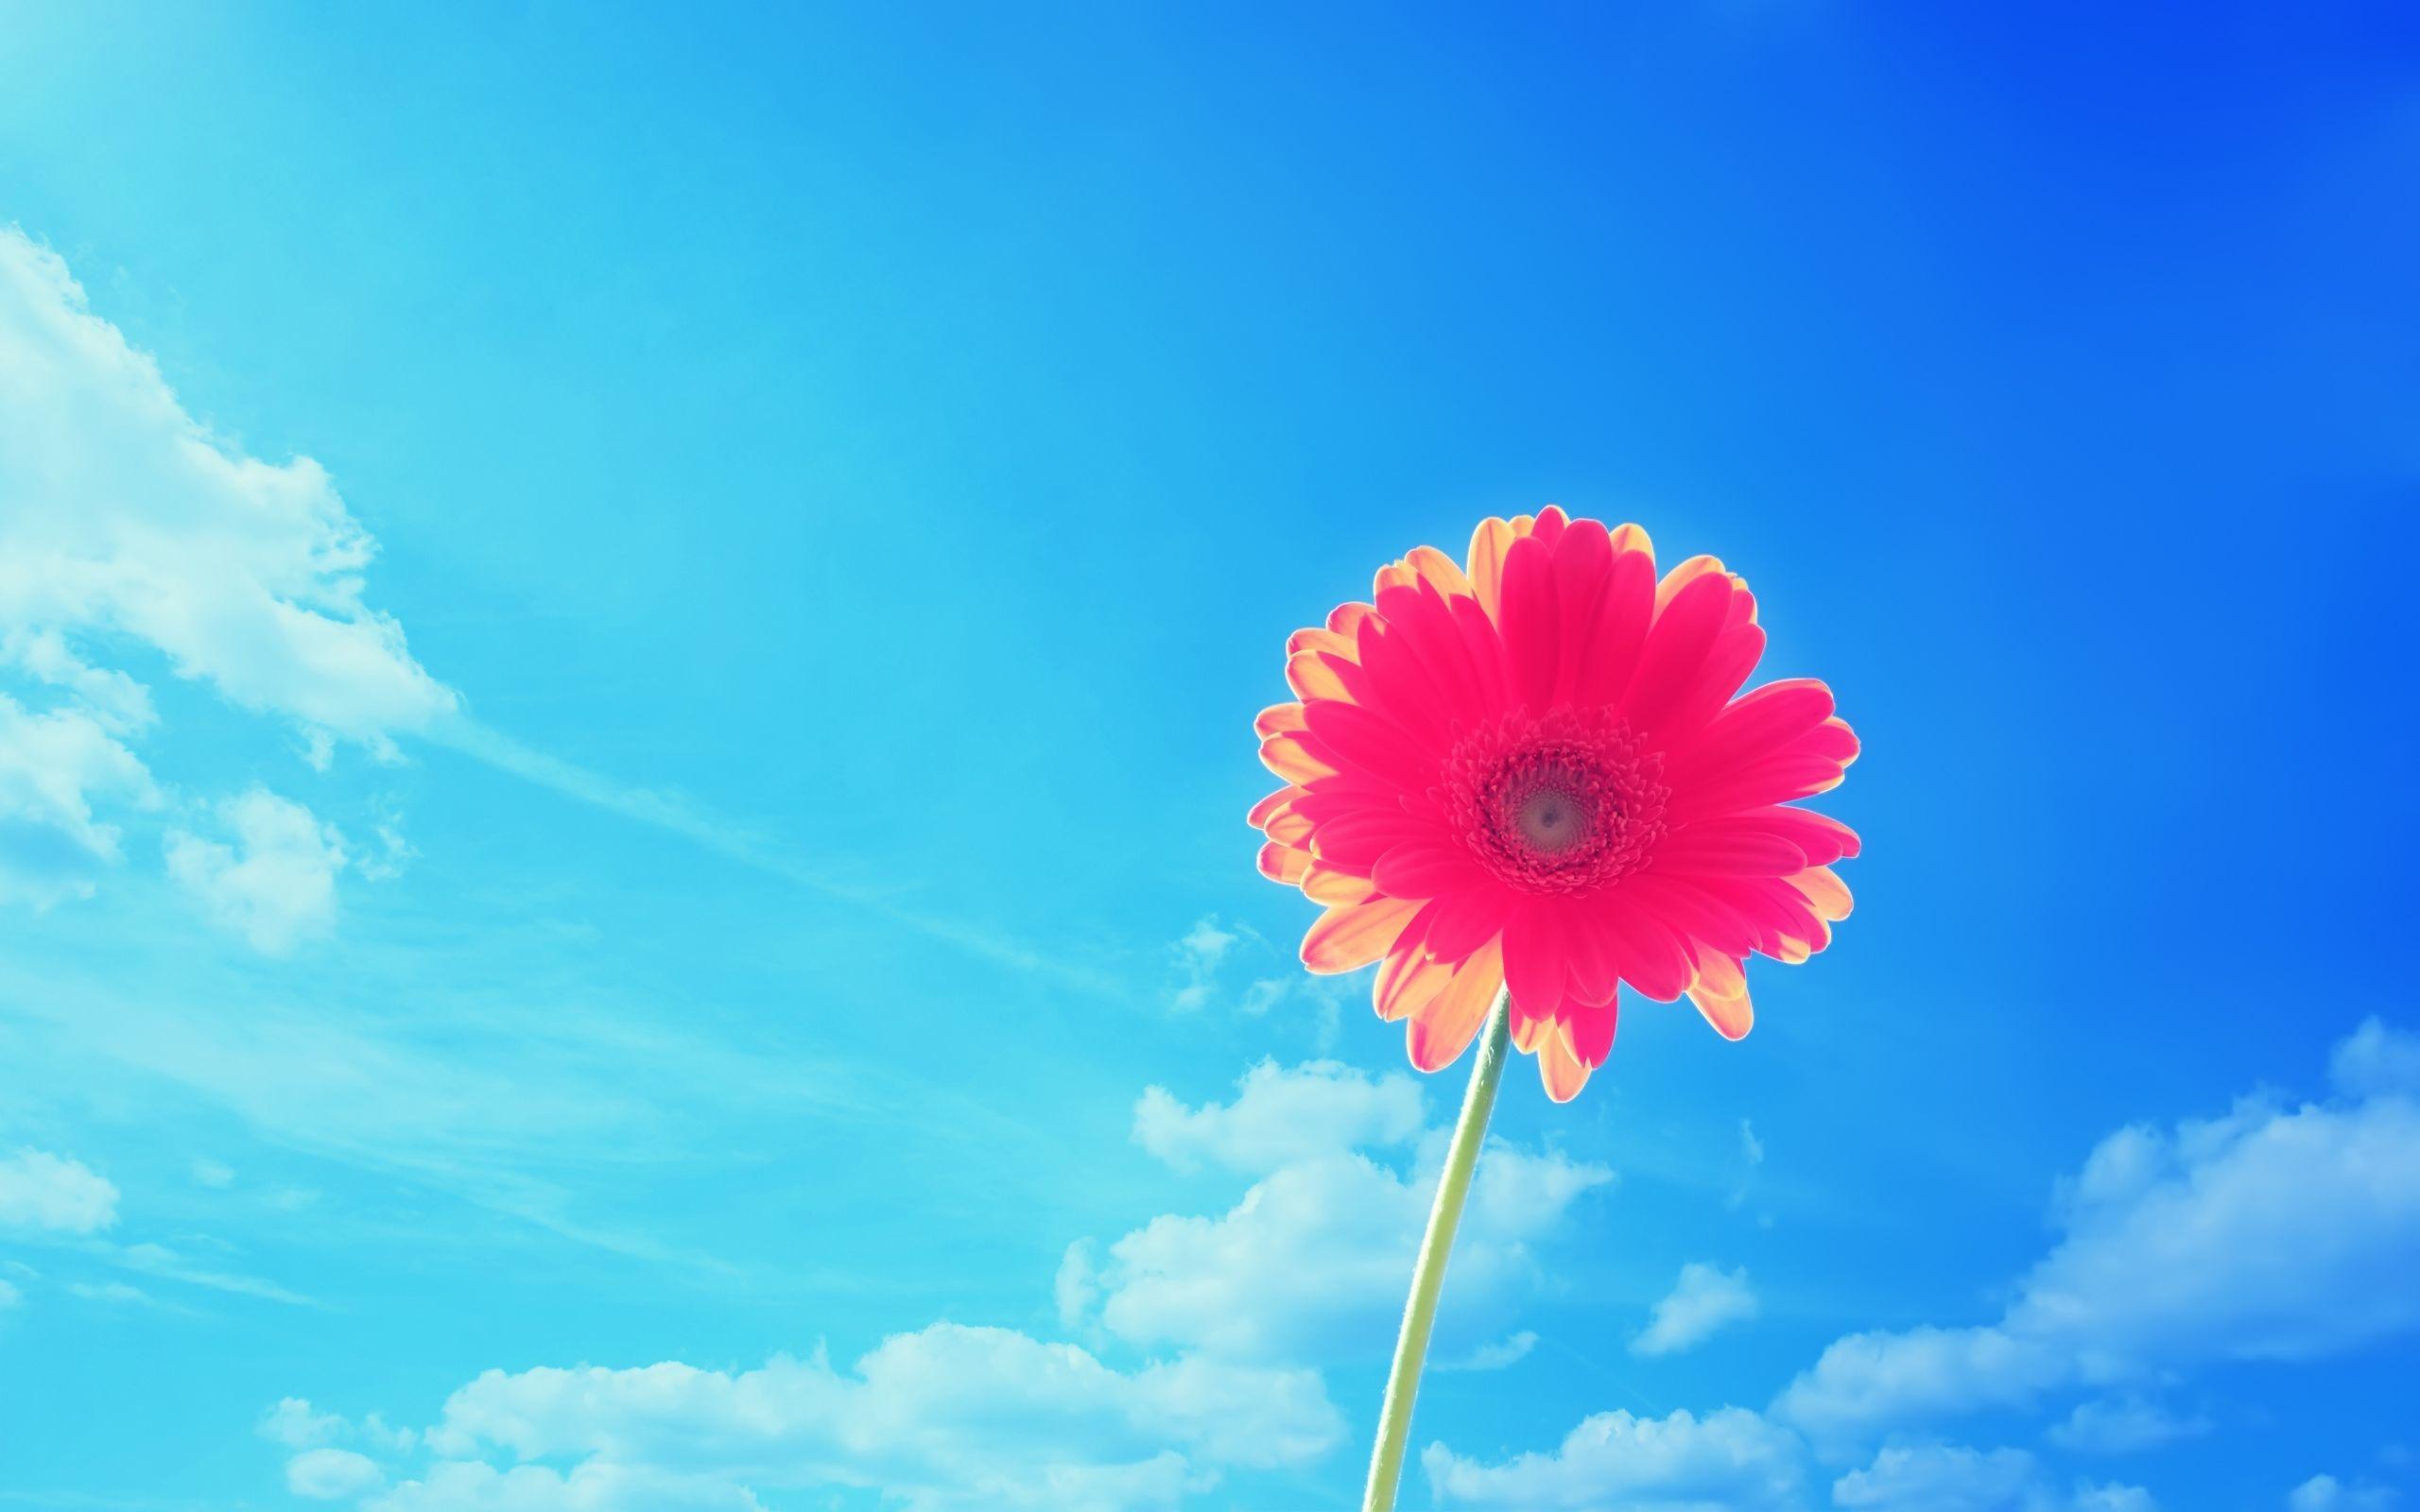 Free HD Flower Wallpaper For Computer Image Background Pc Full